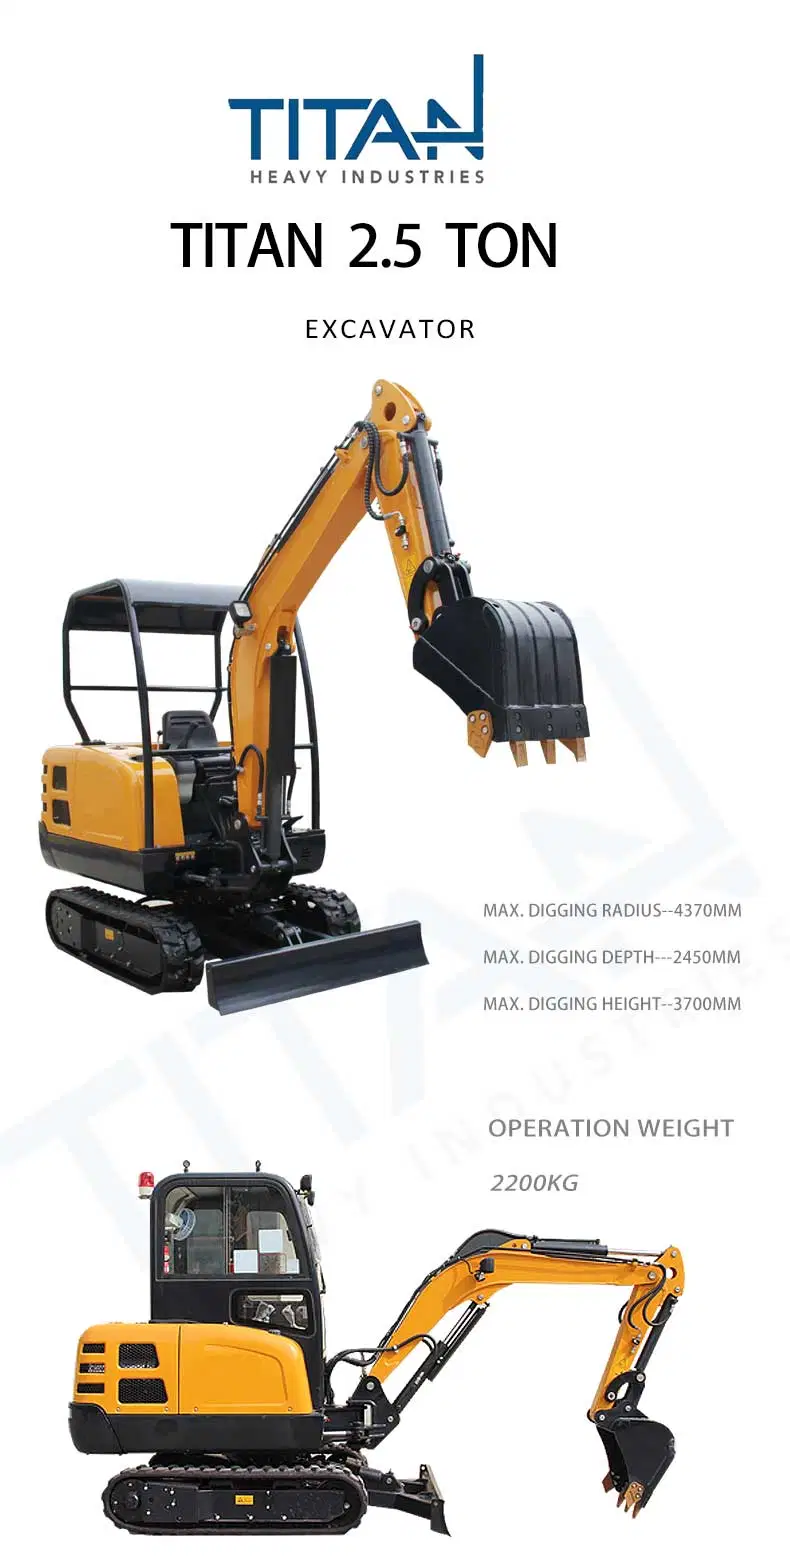 China Titan Heavy Machinery Factory Excavator - Unmatched Power and Guaranteed Best Price!